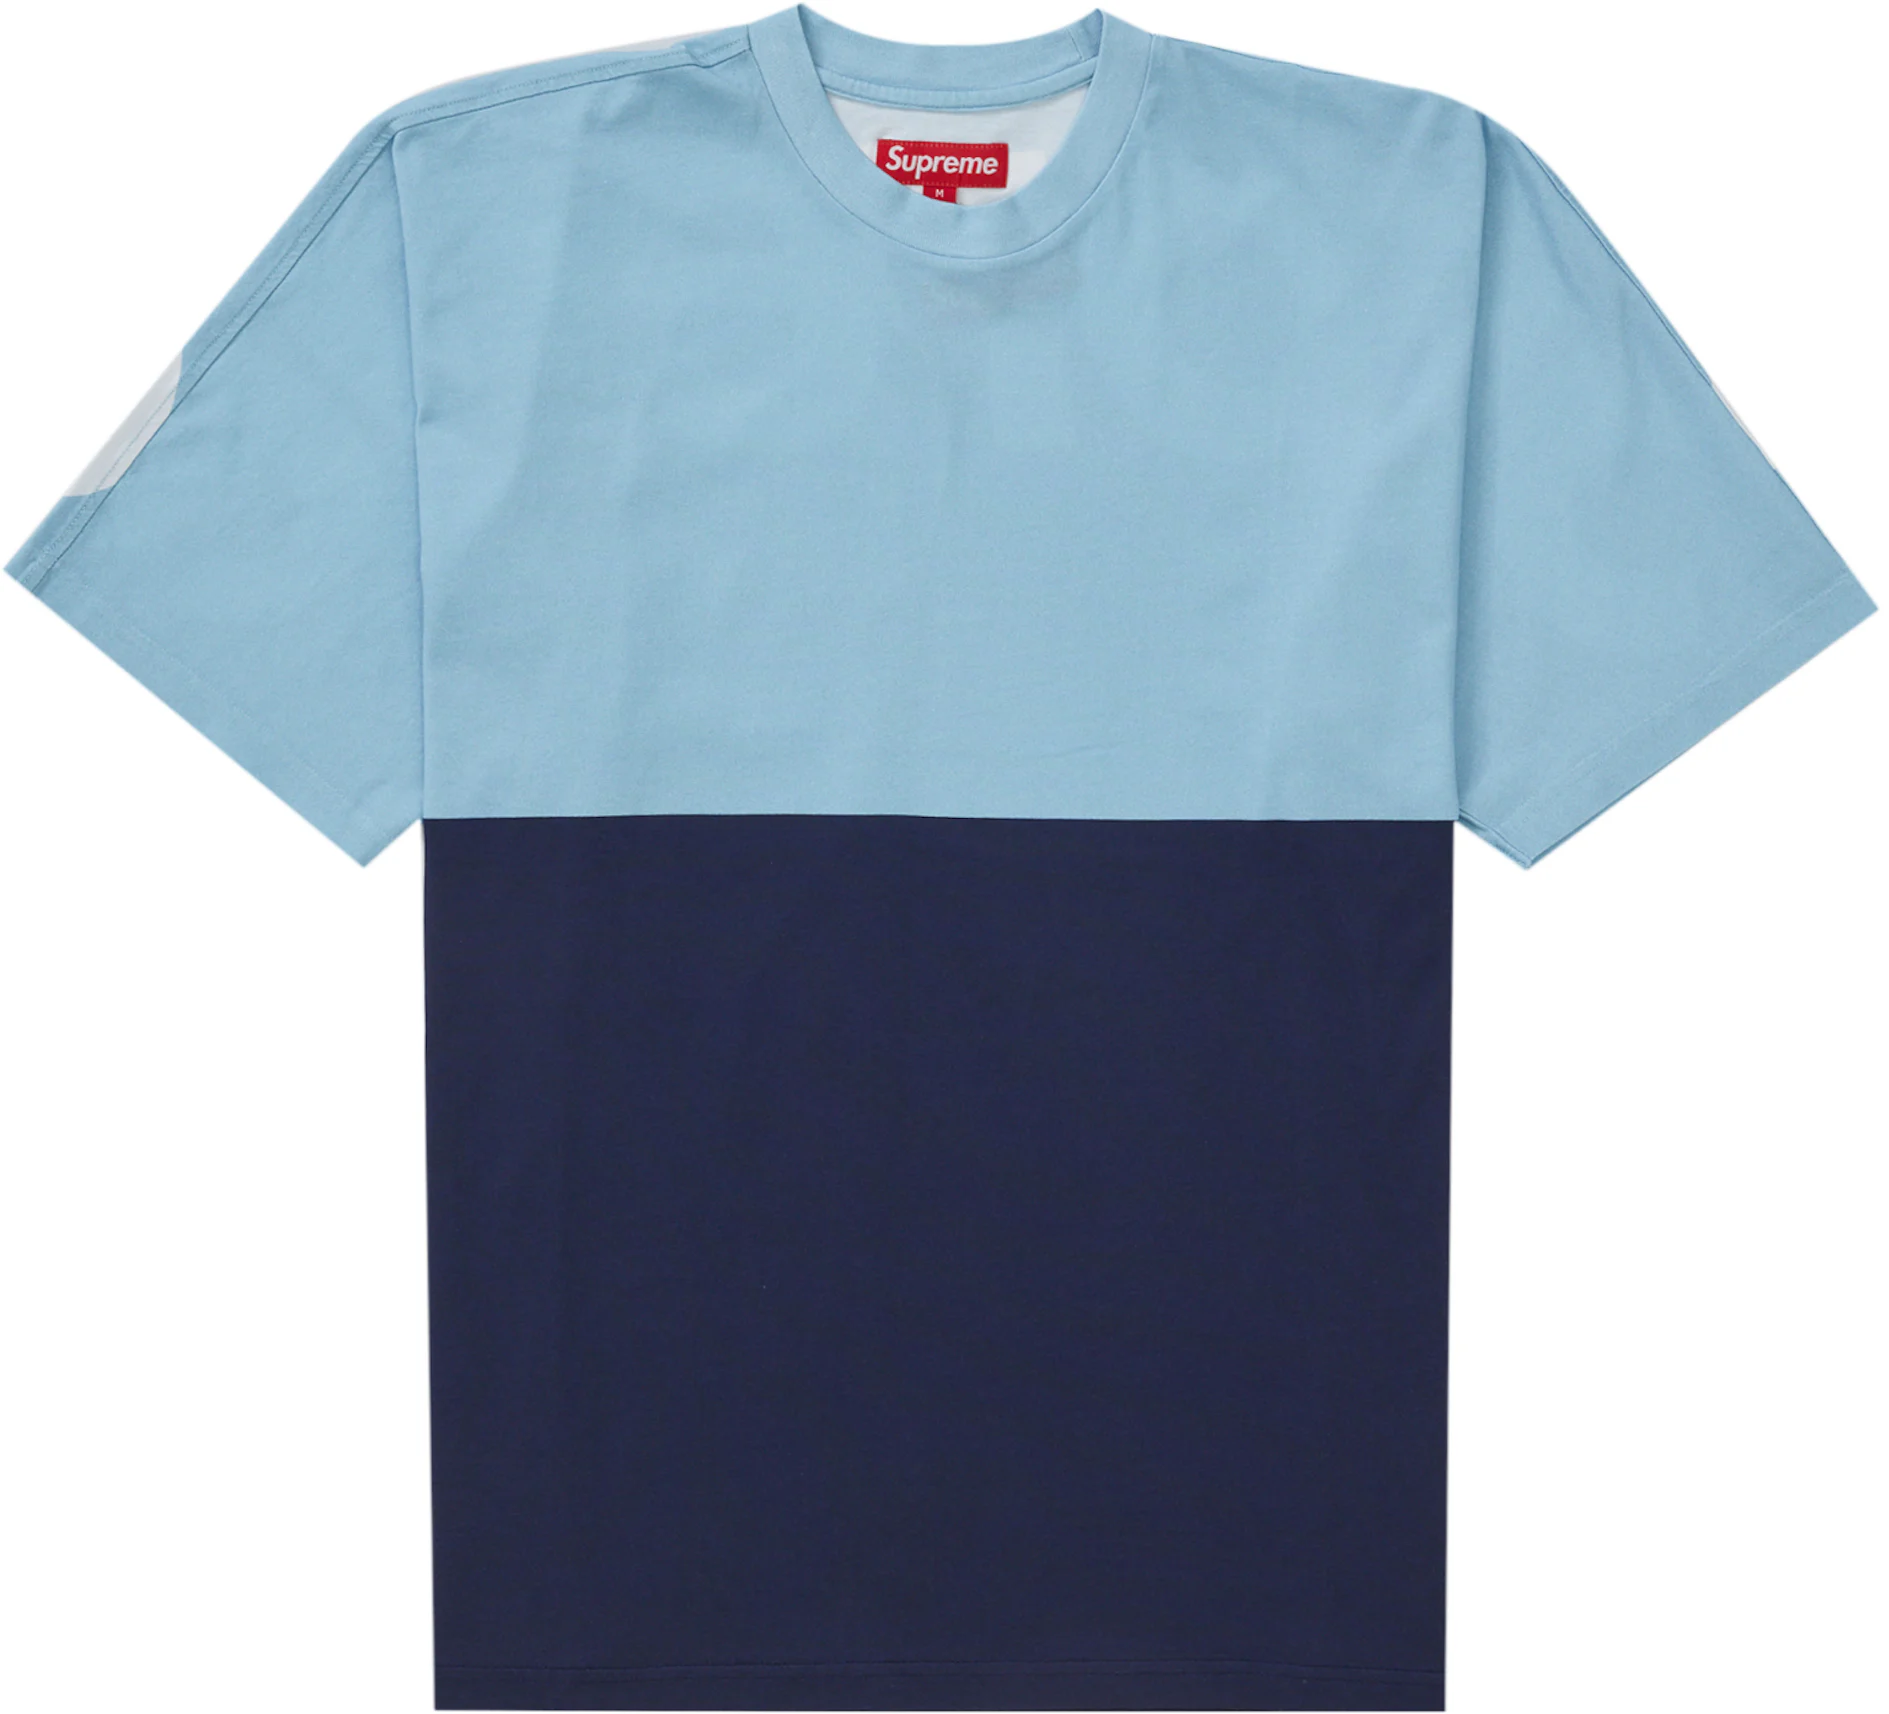 Supreme Overprint Knockout T-shirts S/S Tops 4colors FW23 Size S- XXL New